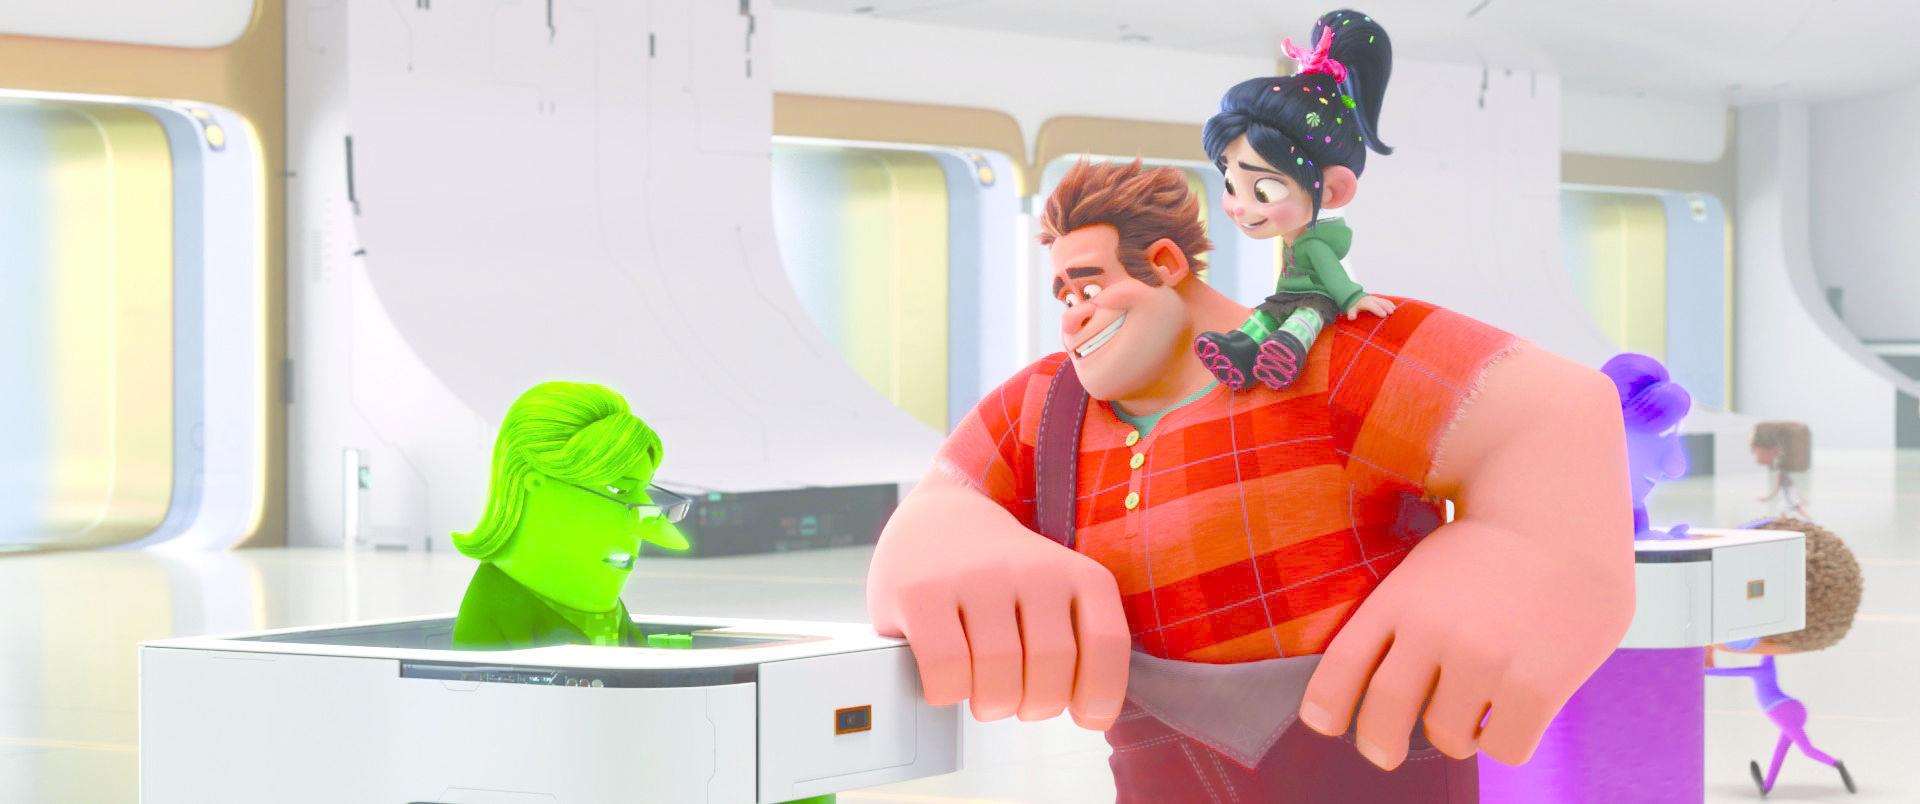 Ralph Breaks The Internet. Picture credit: PA Photo/Disney.